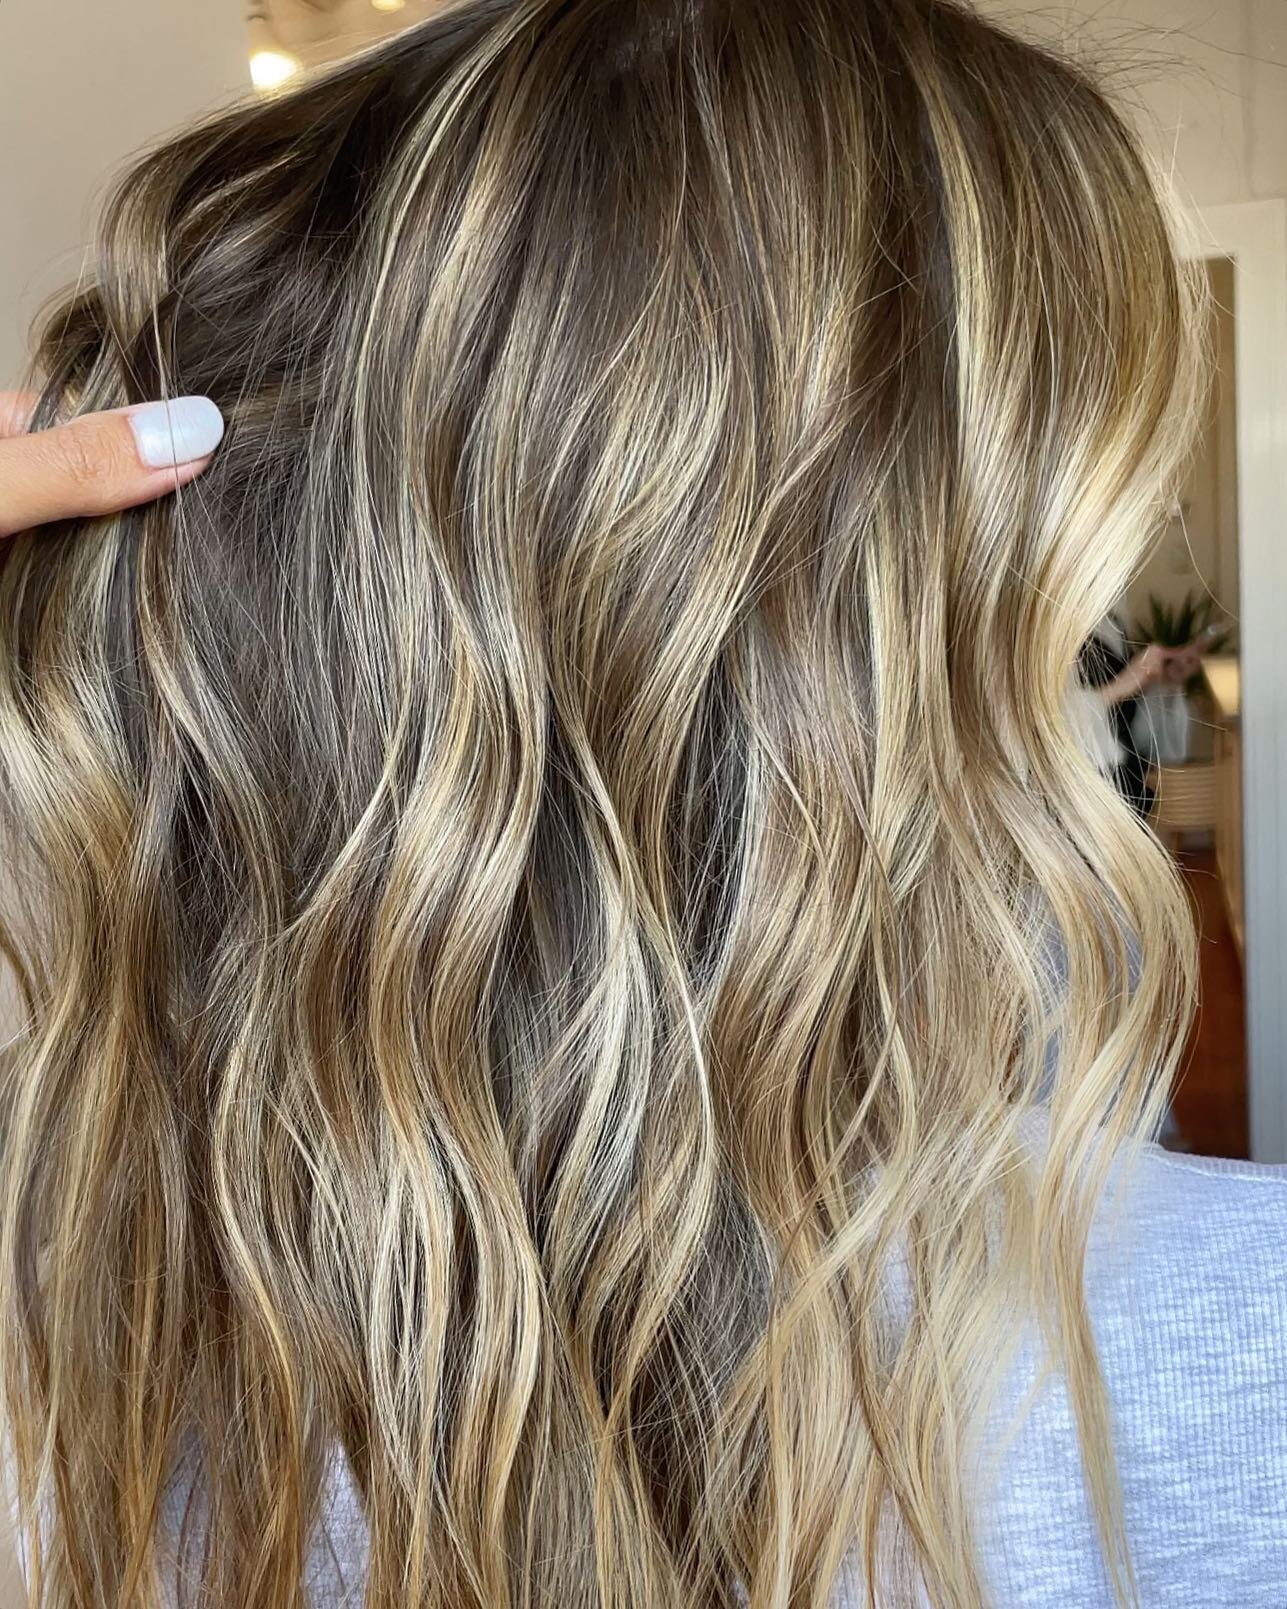 @nicehairbyro does it again with this gorgeous color, the perfect transition for springtime 🌷🌿💐

#davines #alurambeauty #leafandflowerhair #k18 #downtownfrederickmd #frederickmd #frederickmdhair #frederickmdhairstylist #marylandhairstylist #dmvsty